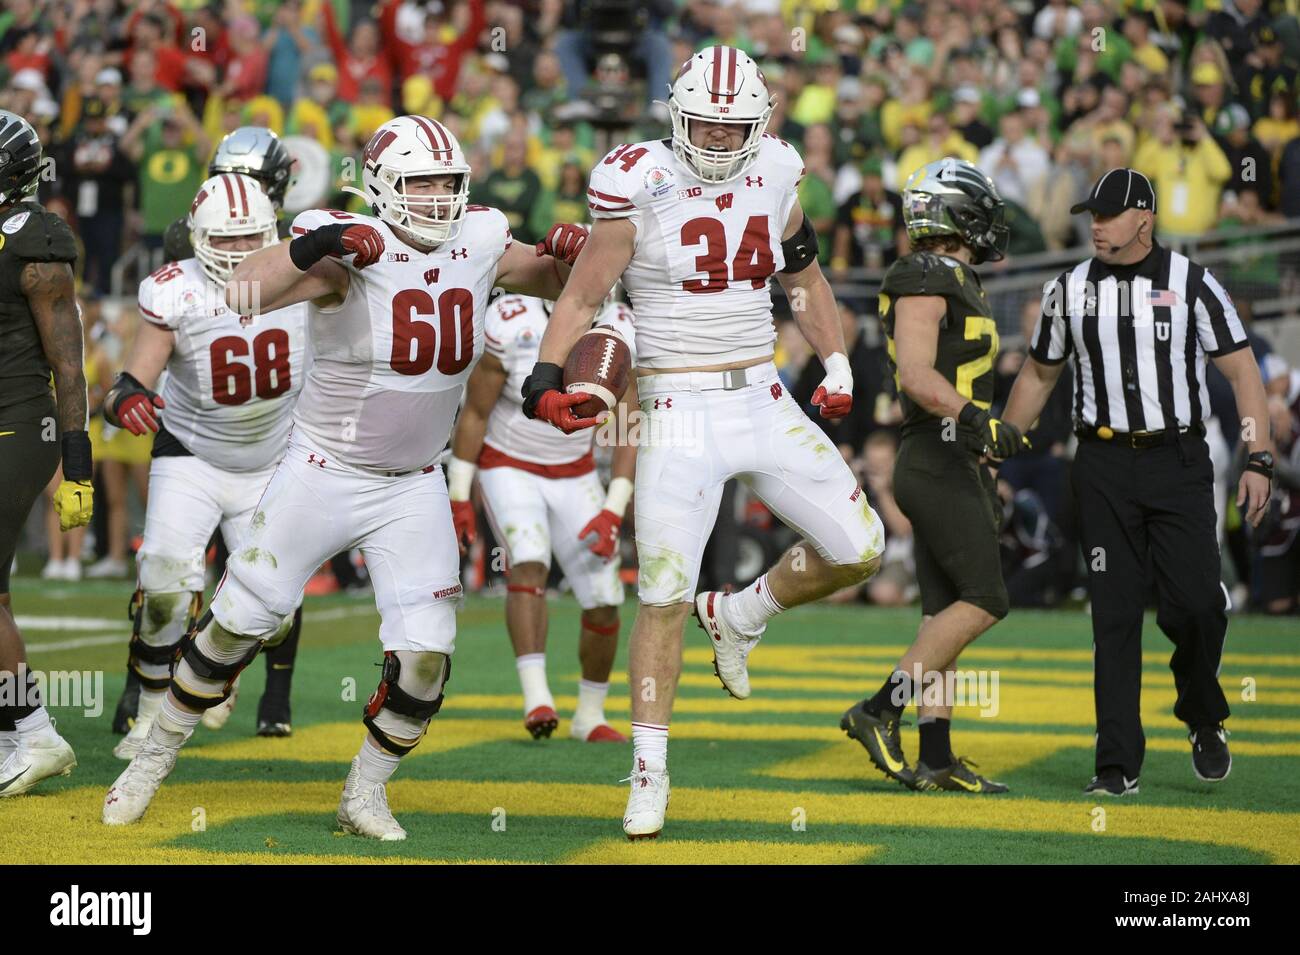 Anaheim, CA, USA. 1st Jan, 2020. Rose Bowl 2020: Wisconsin Badgers fullback Mason Stokke (34) celebrates his rushing touchdown with Badgers offensive lineman Logan Bruss (60) during the 2020 Rose Bowl game as the Oregon Ducks play the Wisconsin Badgers at the Rose Bowl in Pasadena, CA. Credit: Jeff Halstead/ZUMA Wire/Alamy Live News Stock Photo